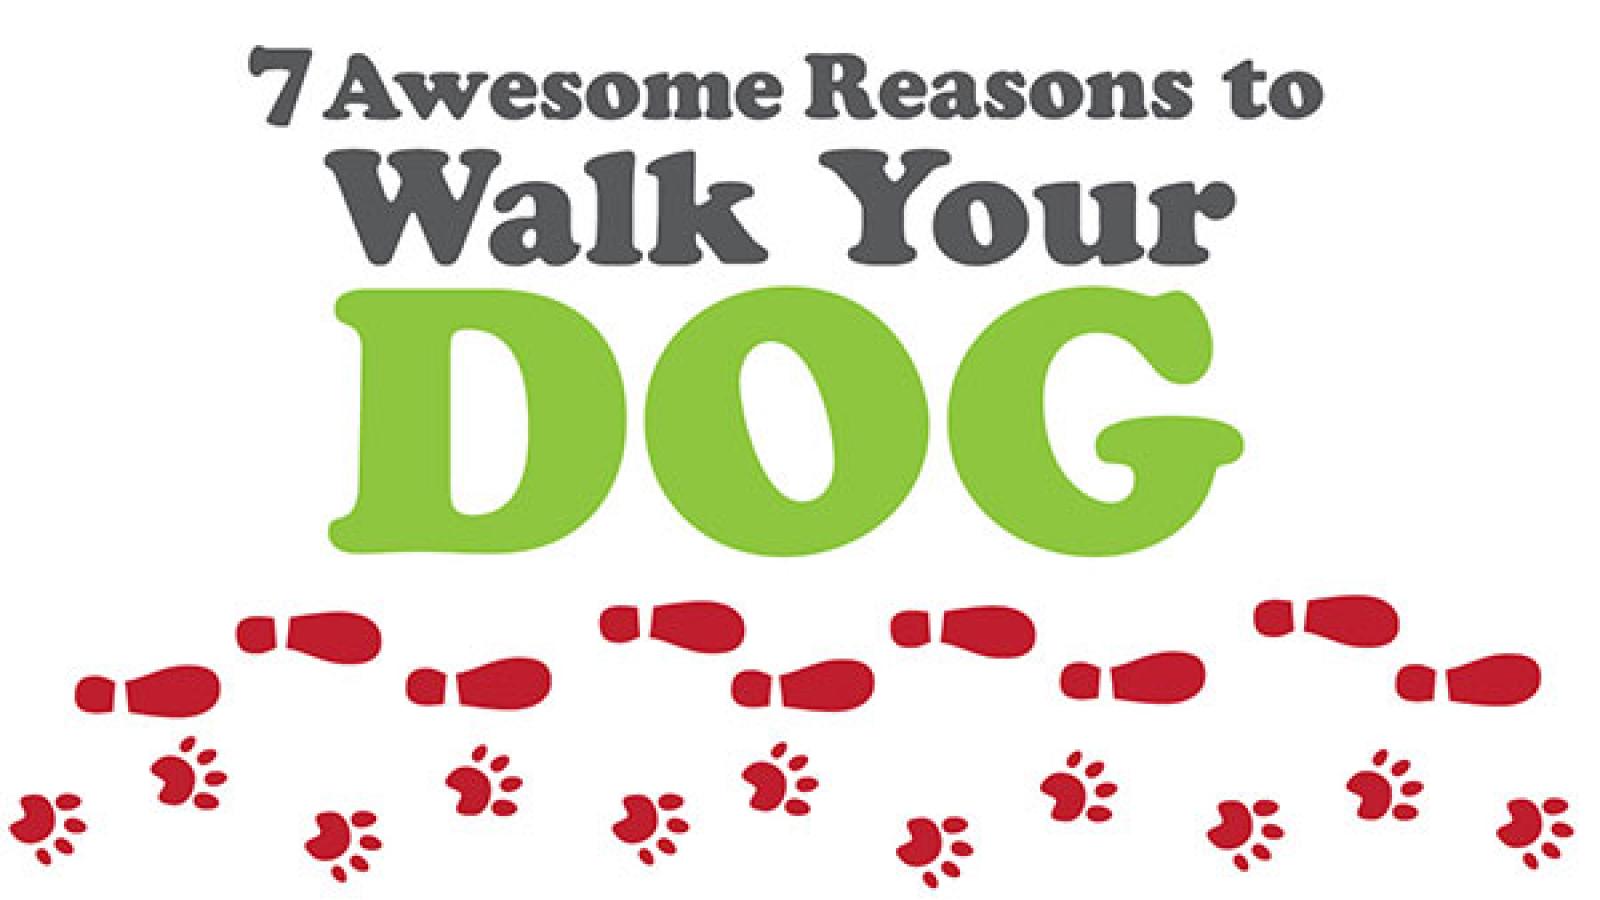 Infographic: 7 Awesome Reasons to Walk Your Dog